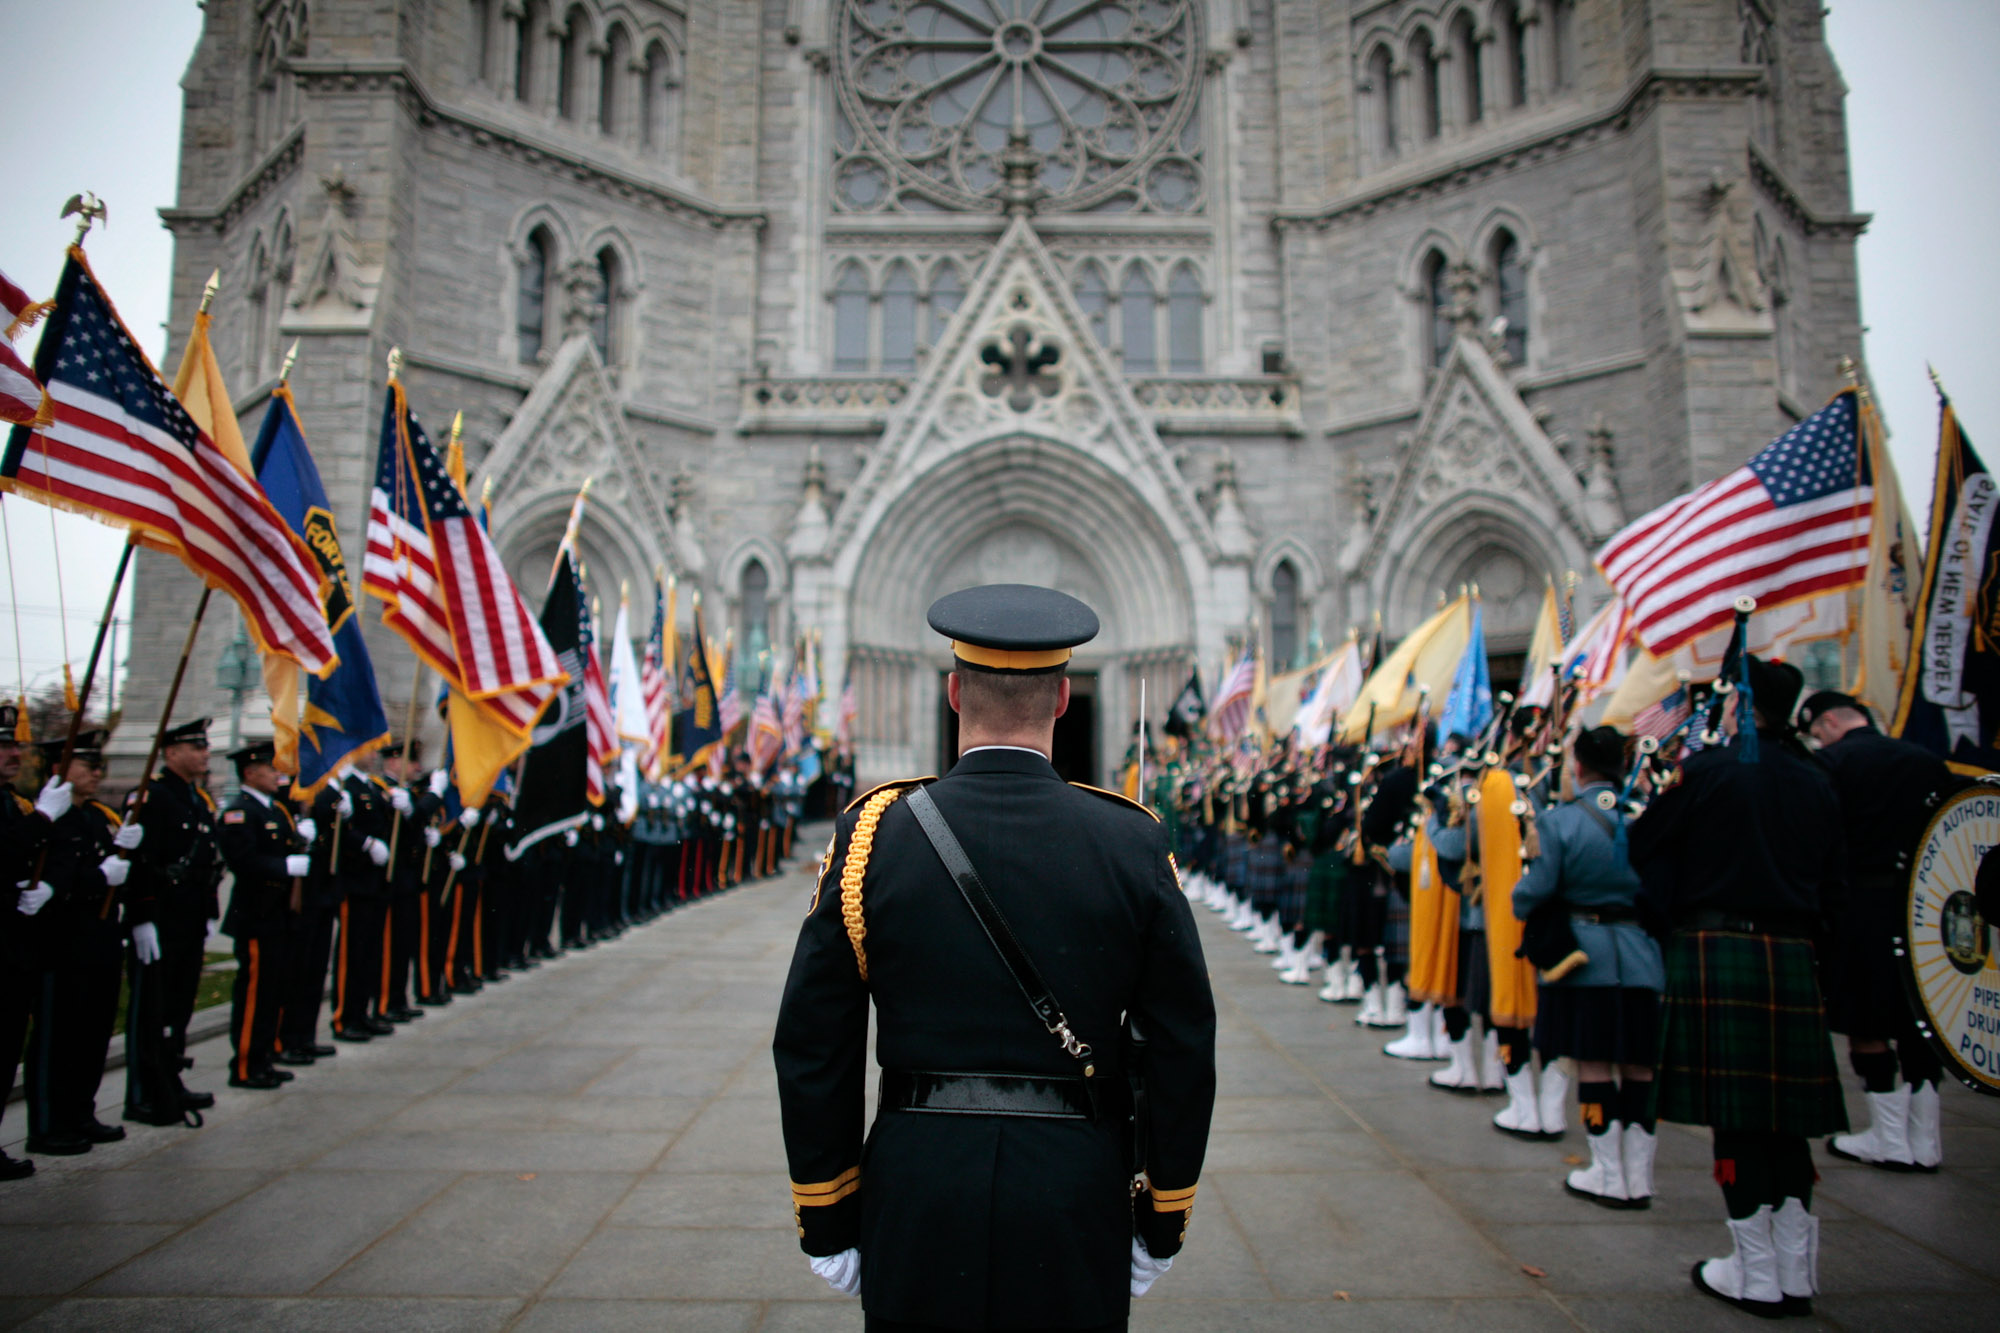 The Honor Guard prepares to enter the Cathedral Basilica  of the Sacred Heart in Newark, NJ Thursday morning for The Arch Bishop's Blue Mass for Law Enforcement  His Excellency The Most Reverend John Joseph Myers, Arch Bishop of Newark presided over the Mass. 